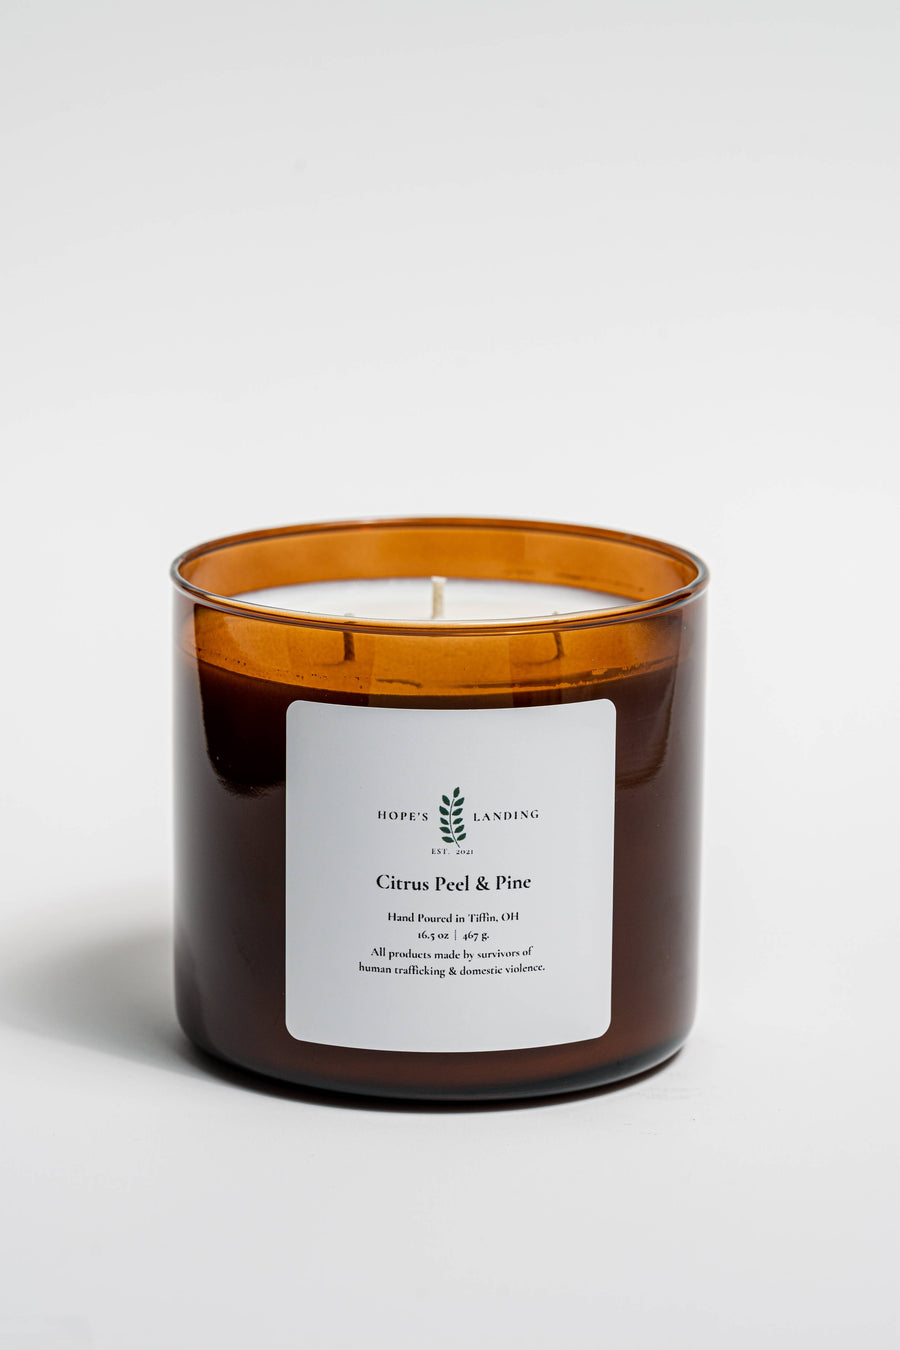 Citrus Peel and Pine Candle: 9.5oz